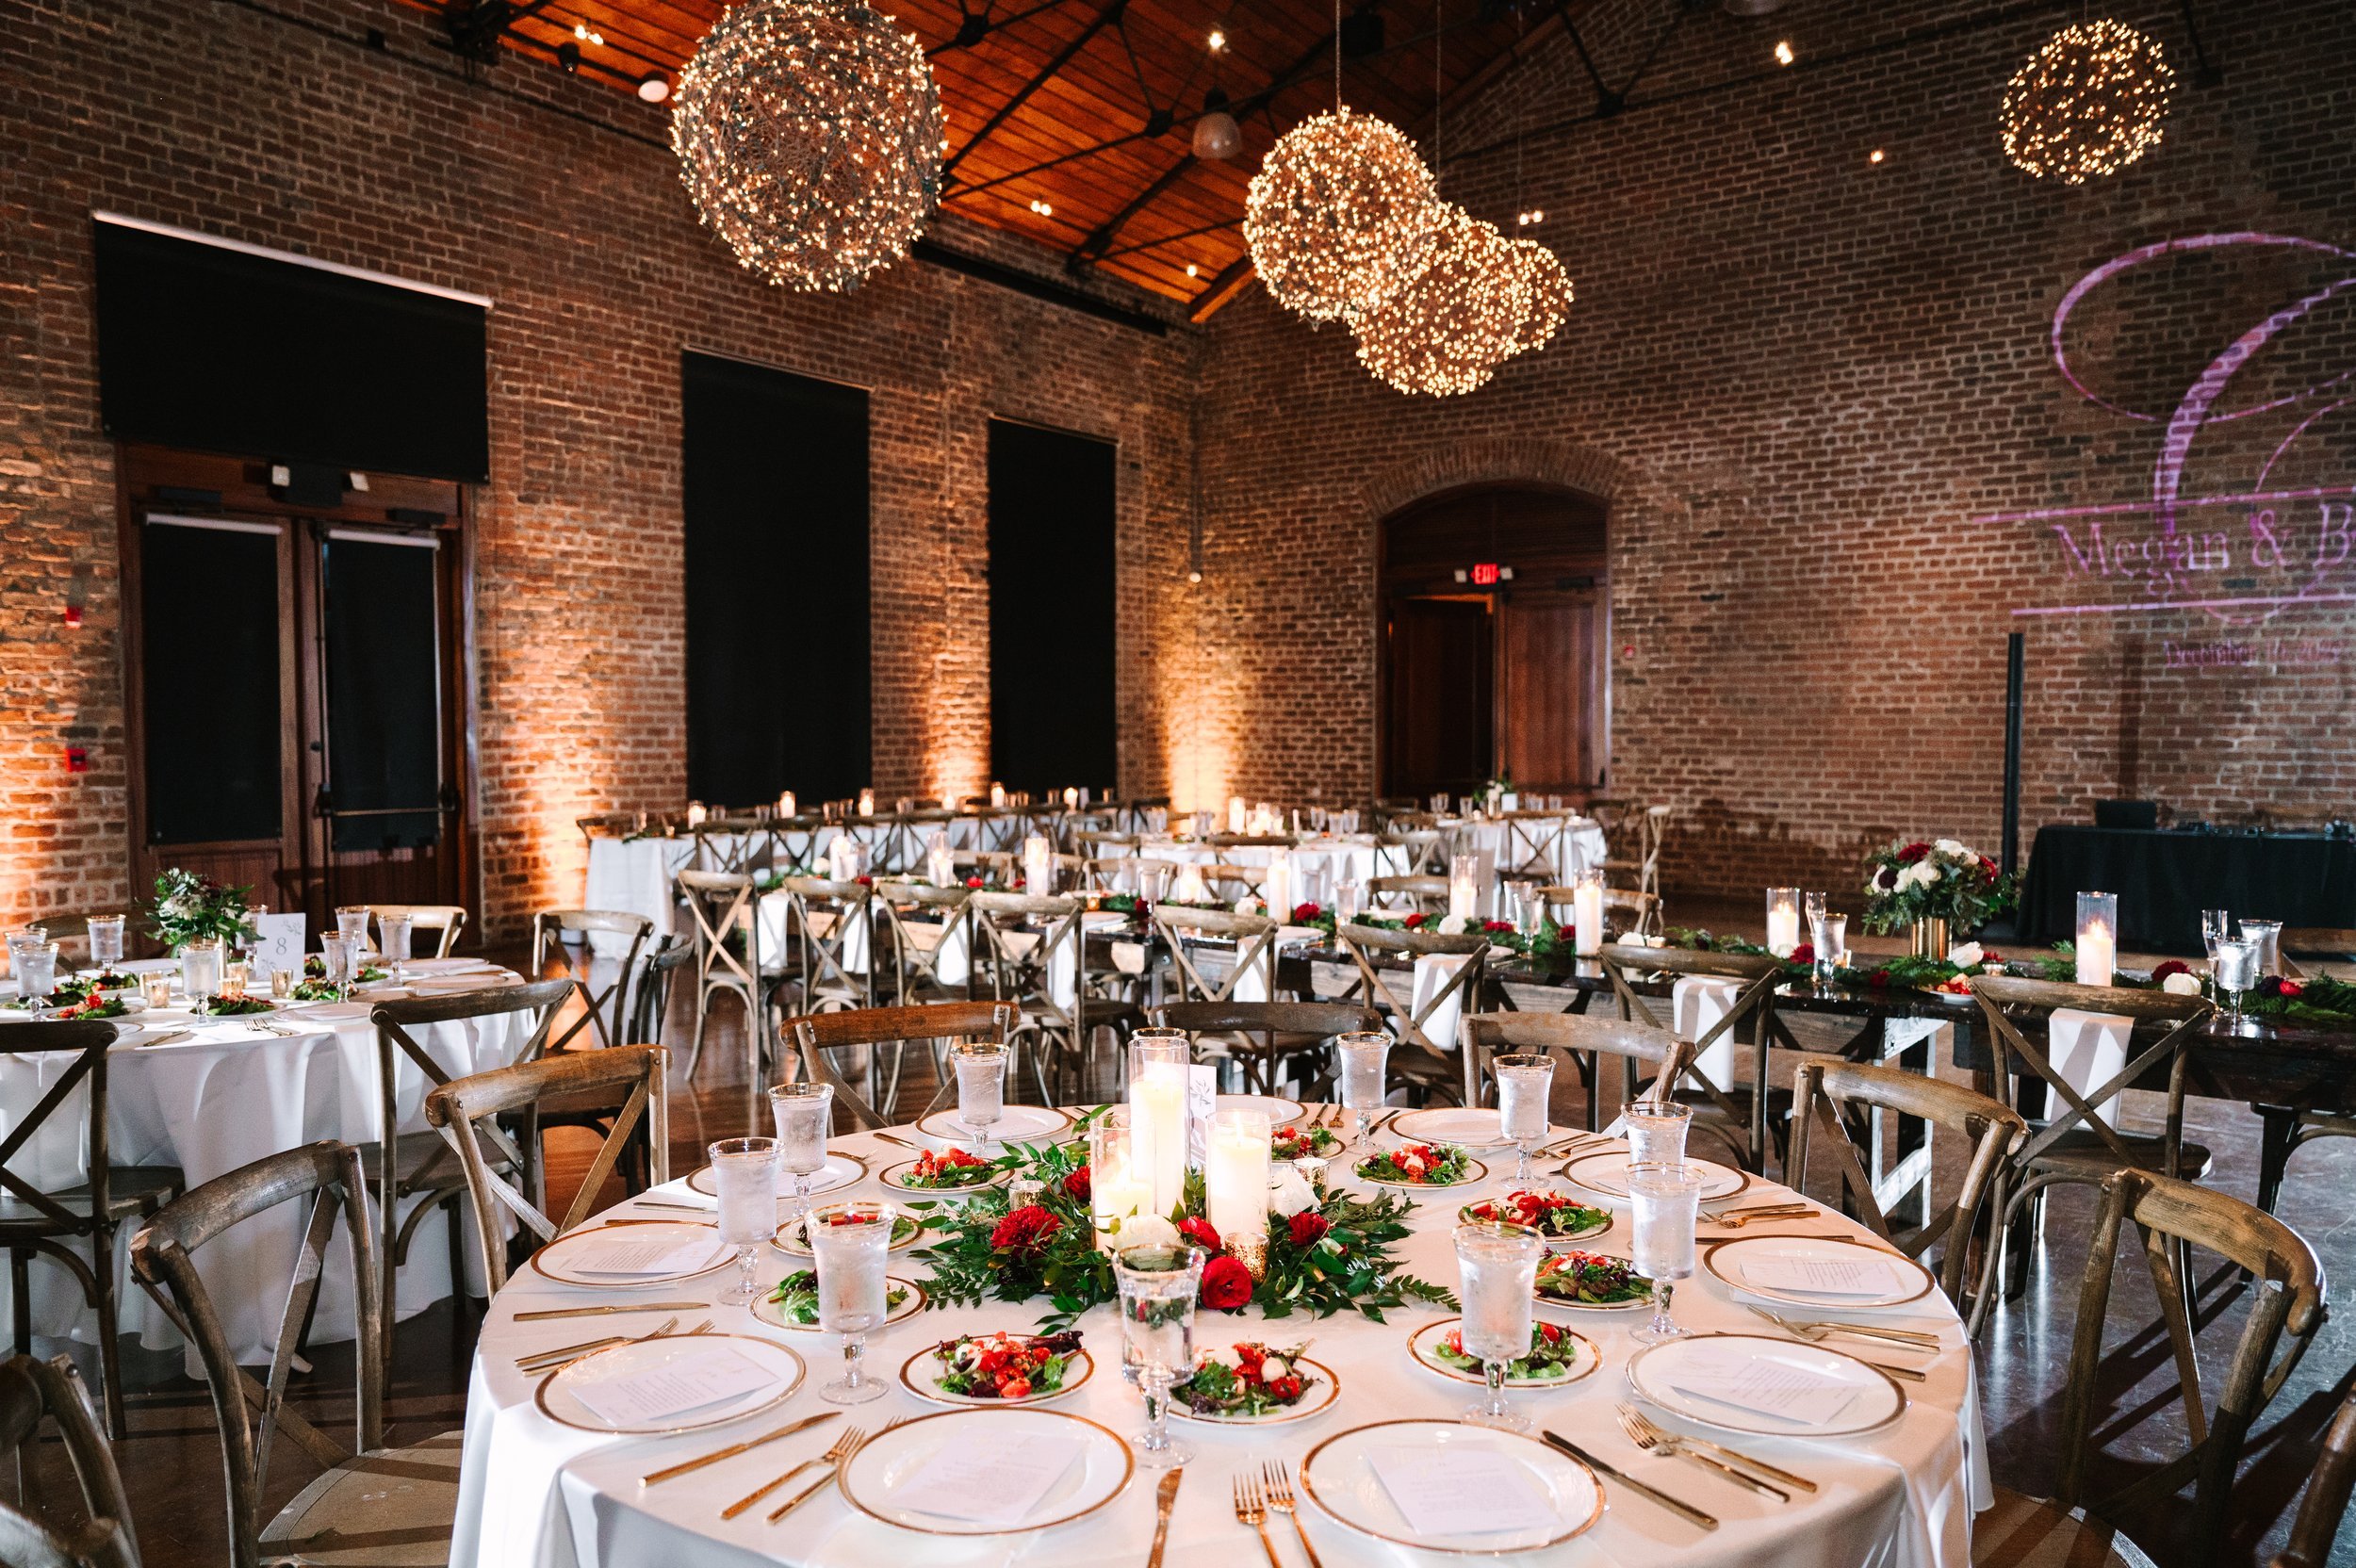 Megan-and-brians-winter-holiday-christmas-wedding-florals-designed-by-savannah-florist-ivory-and-beau-for-wedding-at-the-charles-morris-center-in-downtown-savannah-13.jpg